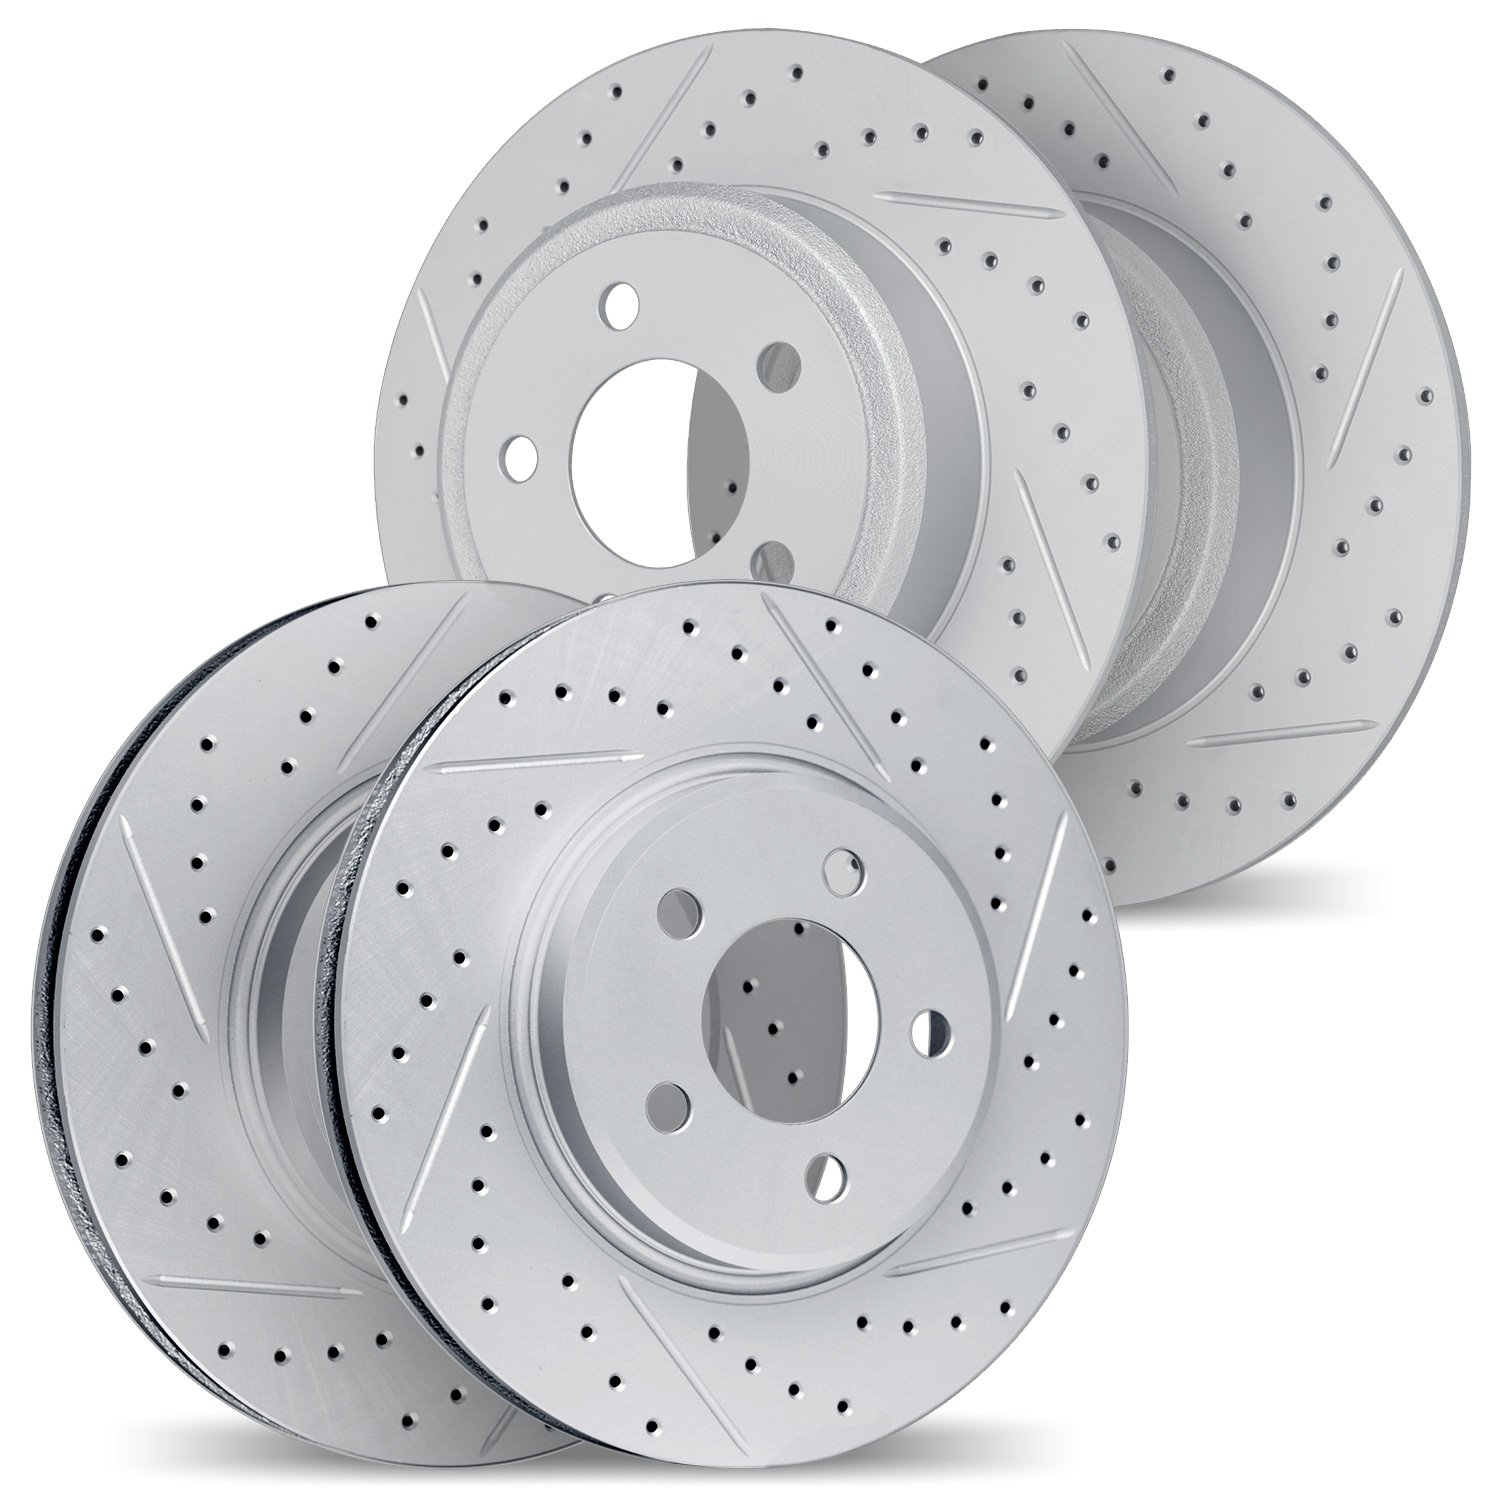 2004-72015 Geoperformance Drilled/Slotted Brake Rotors, 2004-2012 Mitsubishi, Position: Front and Rear